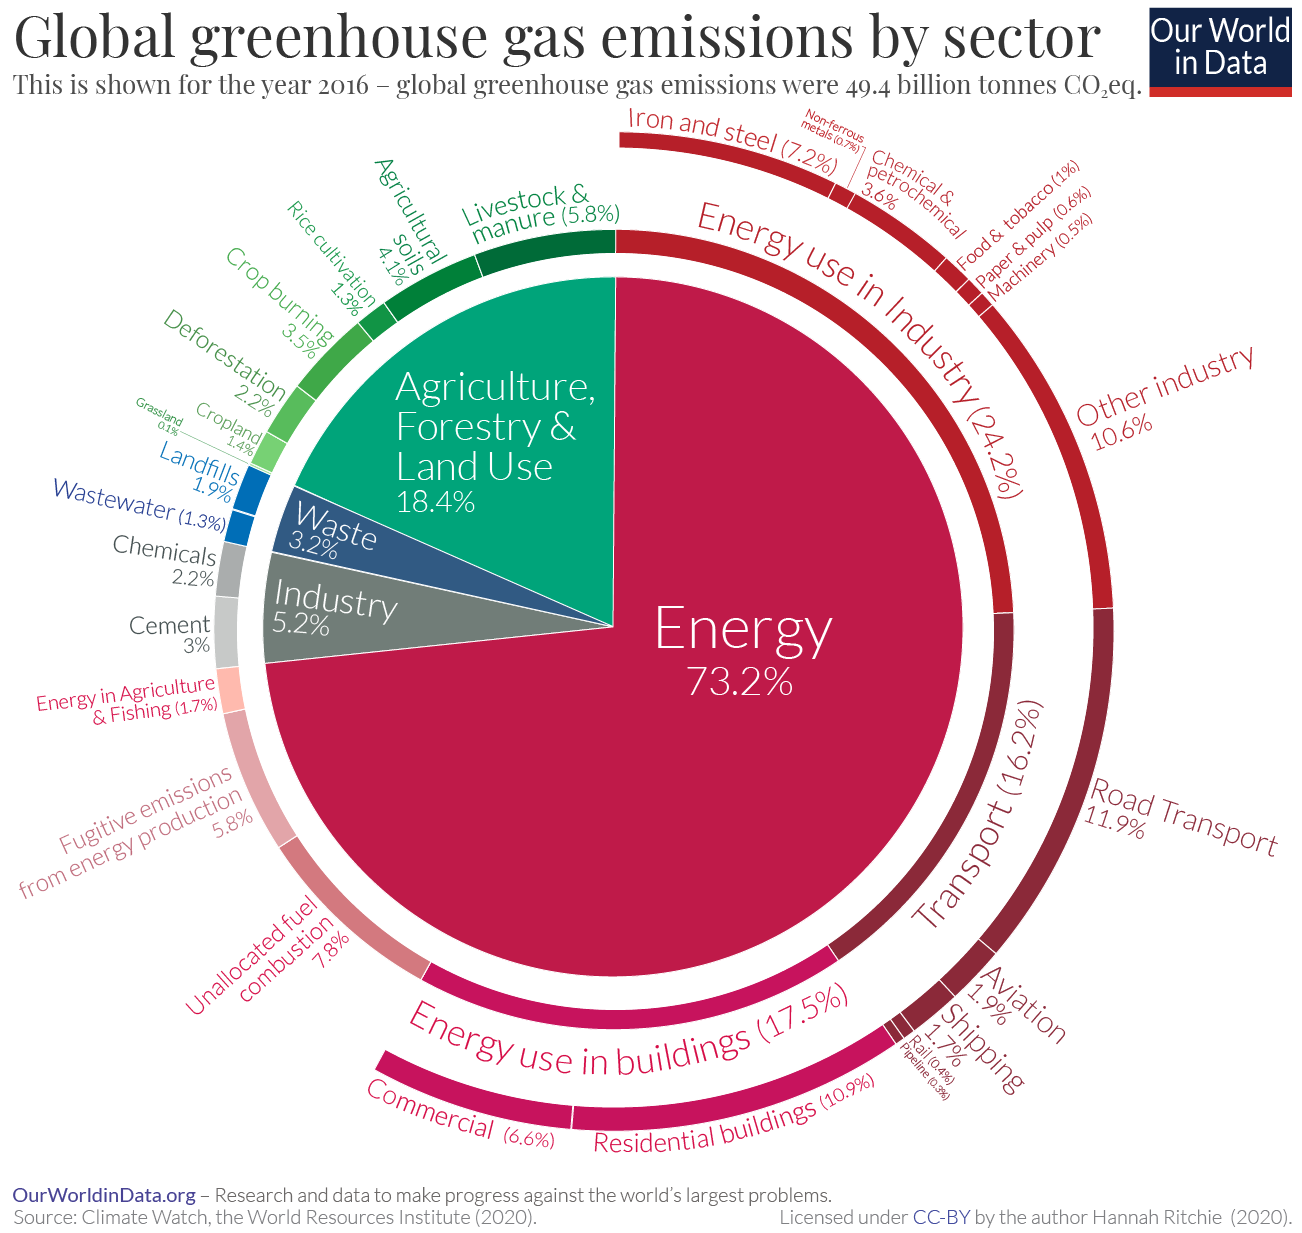 Carbon Emissions by sector